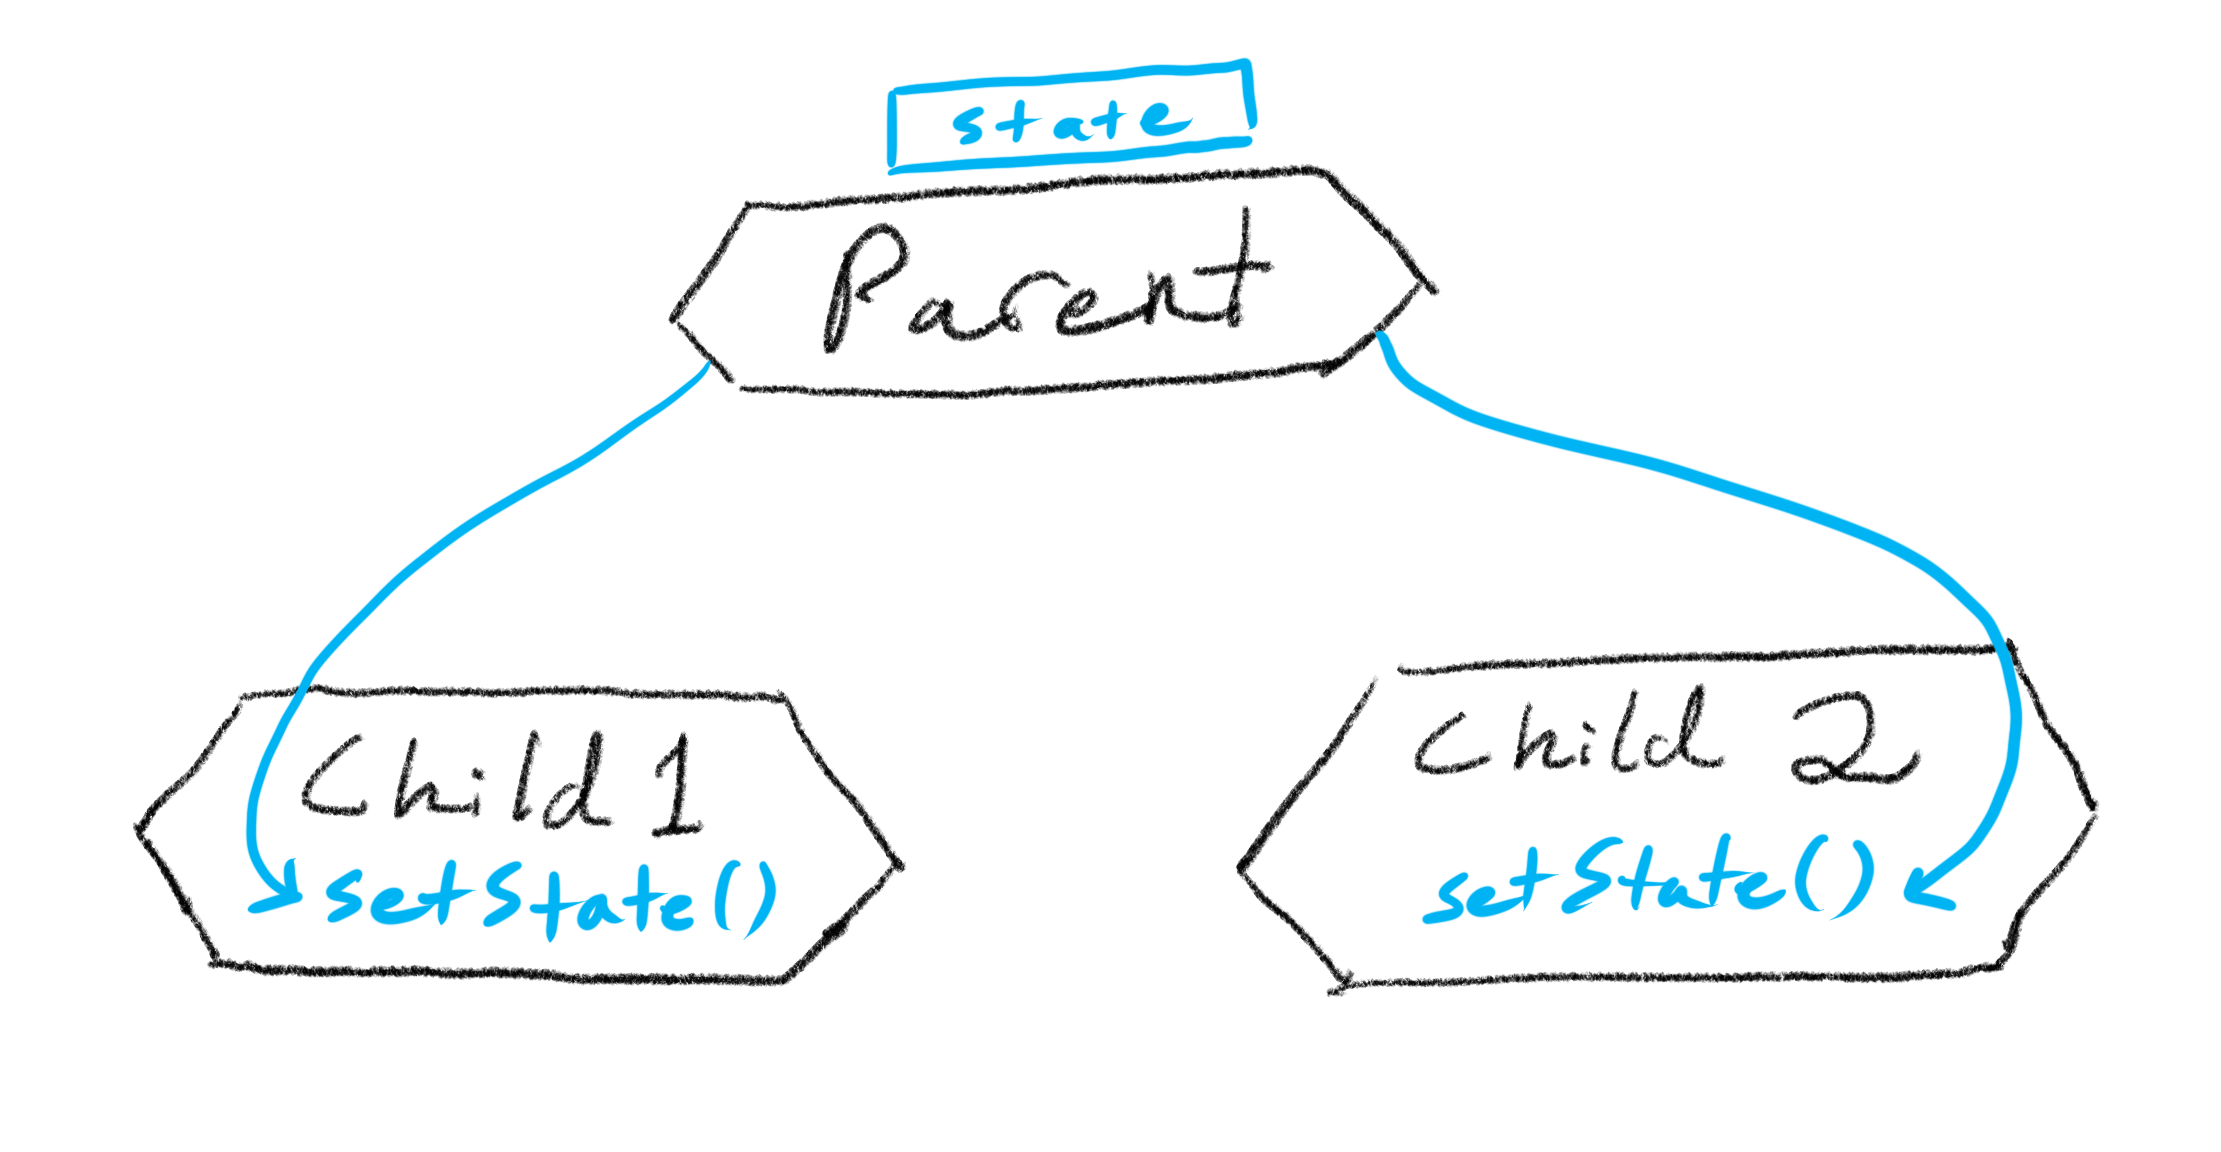 The parent component passes the state setting function to both child components.